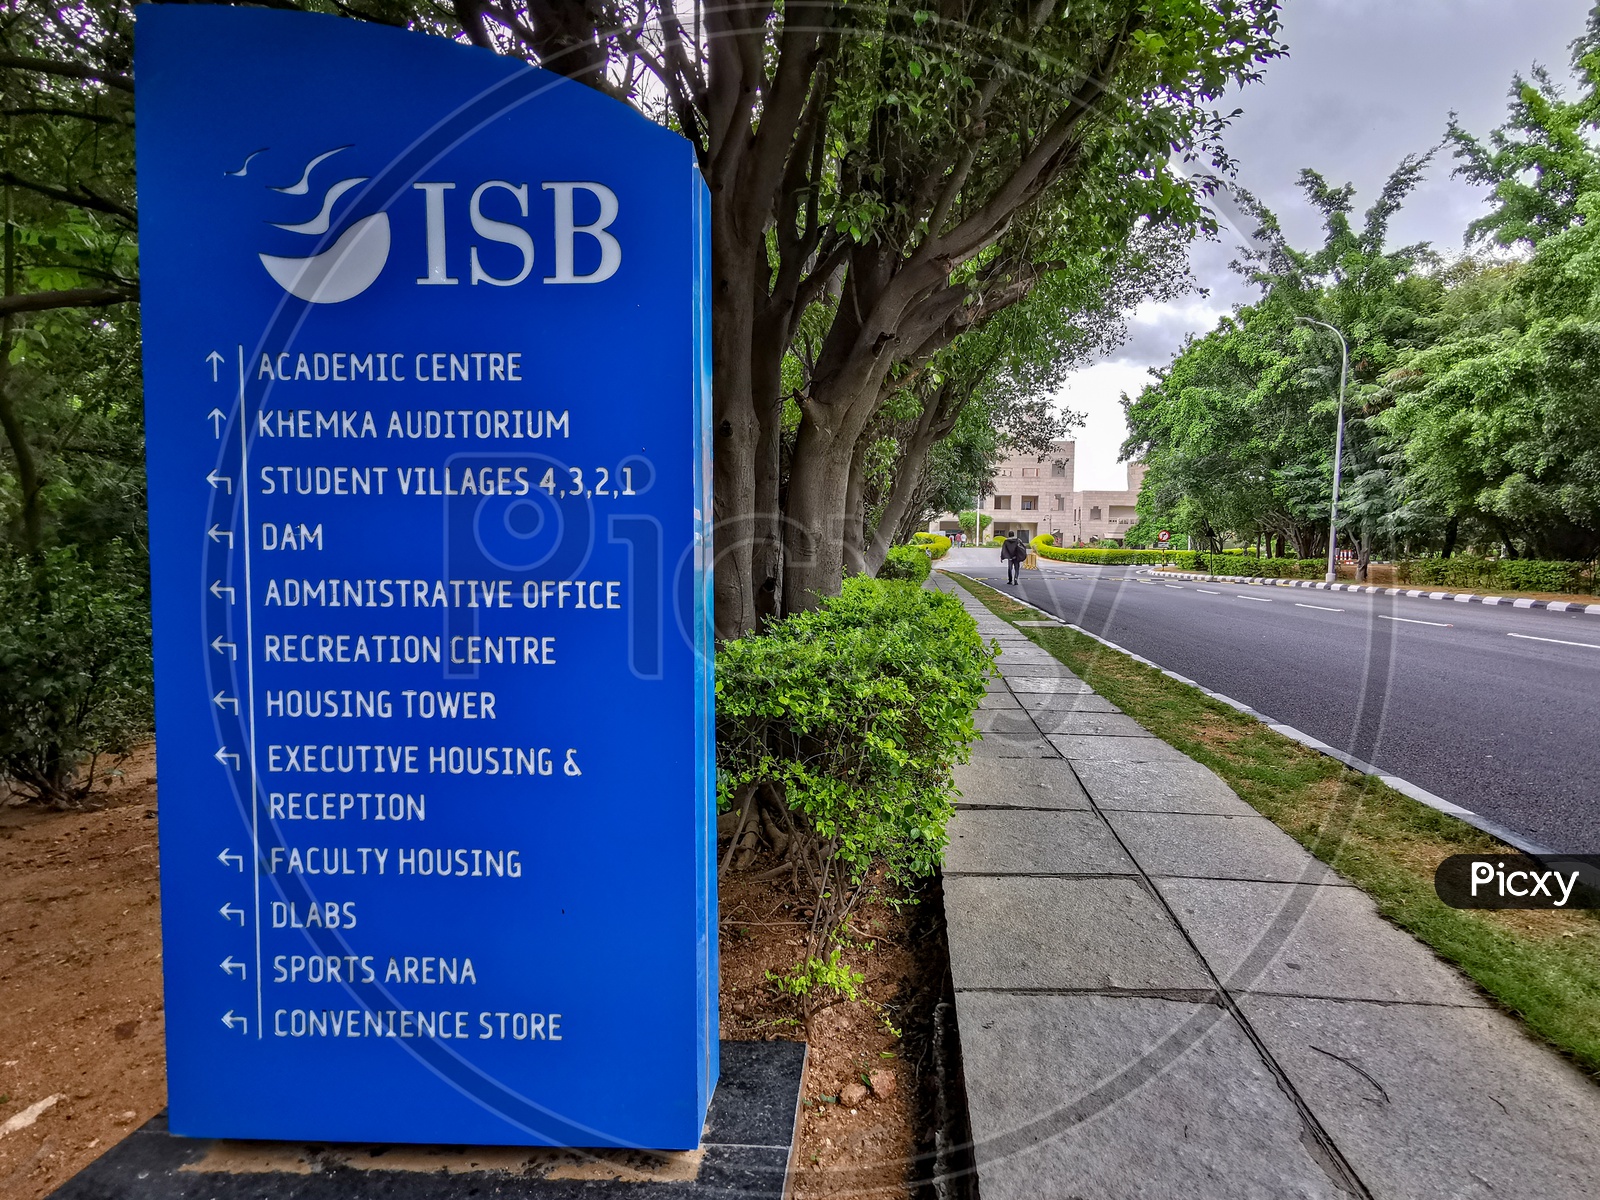 Direction Signboard in ISB (Indian School of Business) Campus